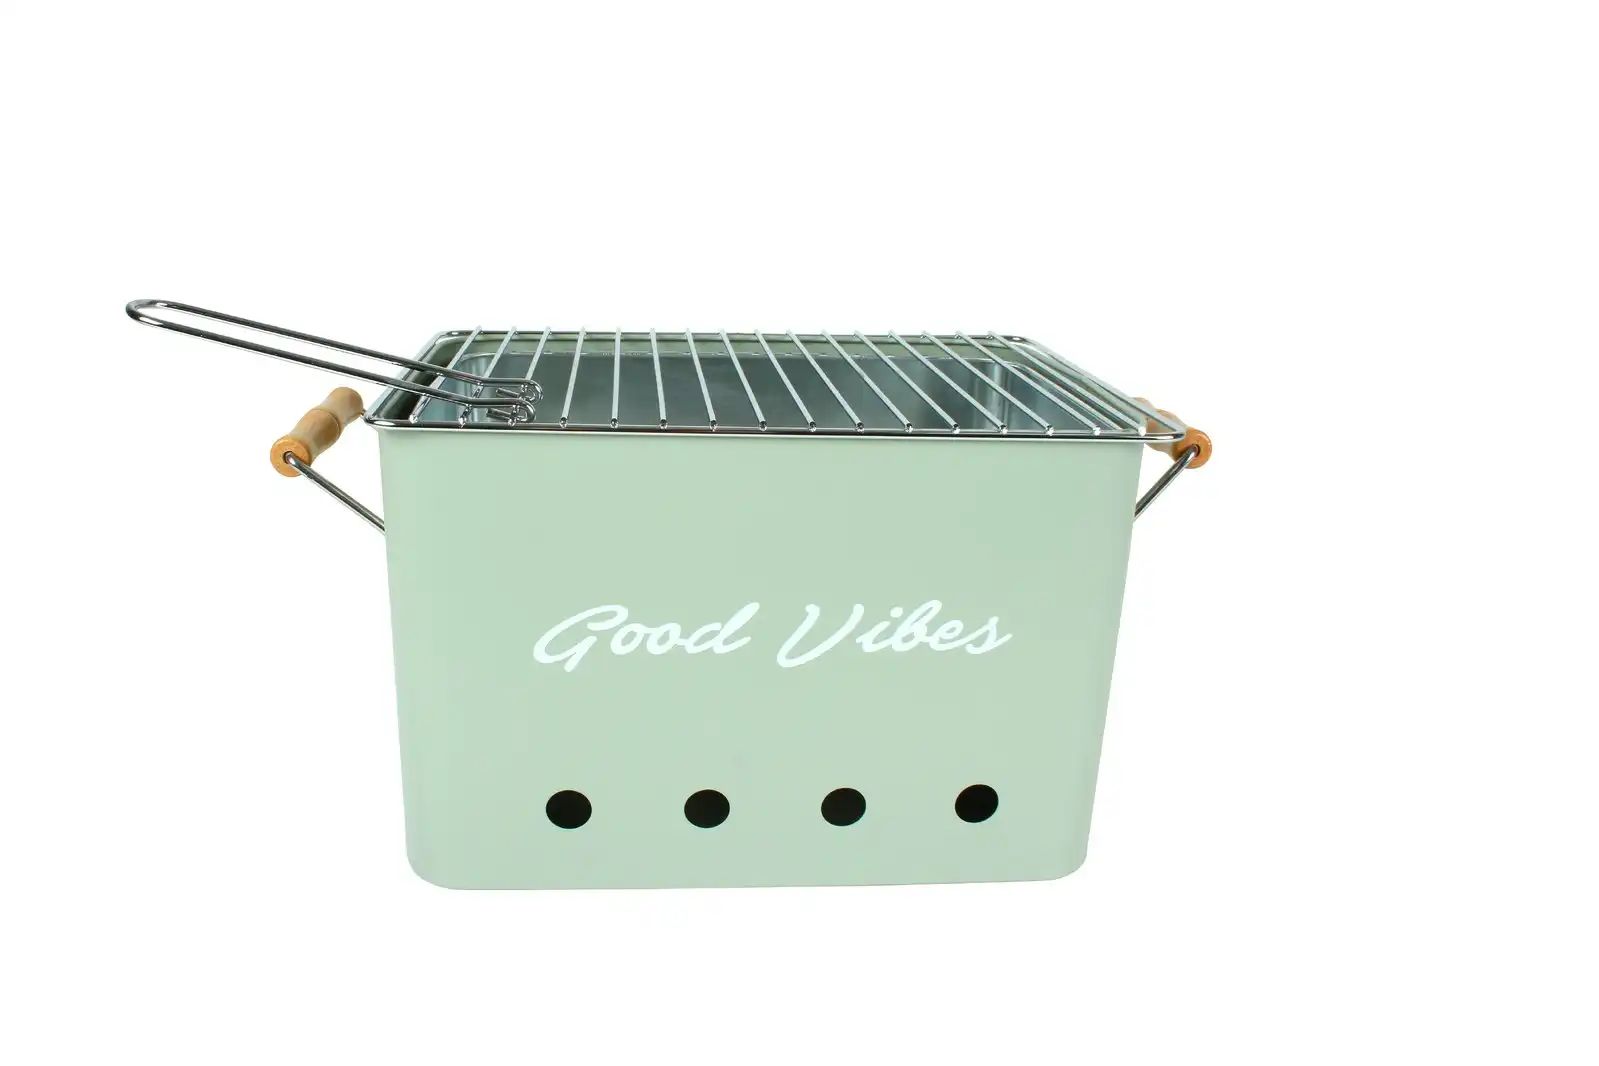 Good Vibes 43x22cm Beach/Outdoor Charcoal Portable BBQ/Barbecue Hamptons Sage